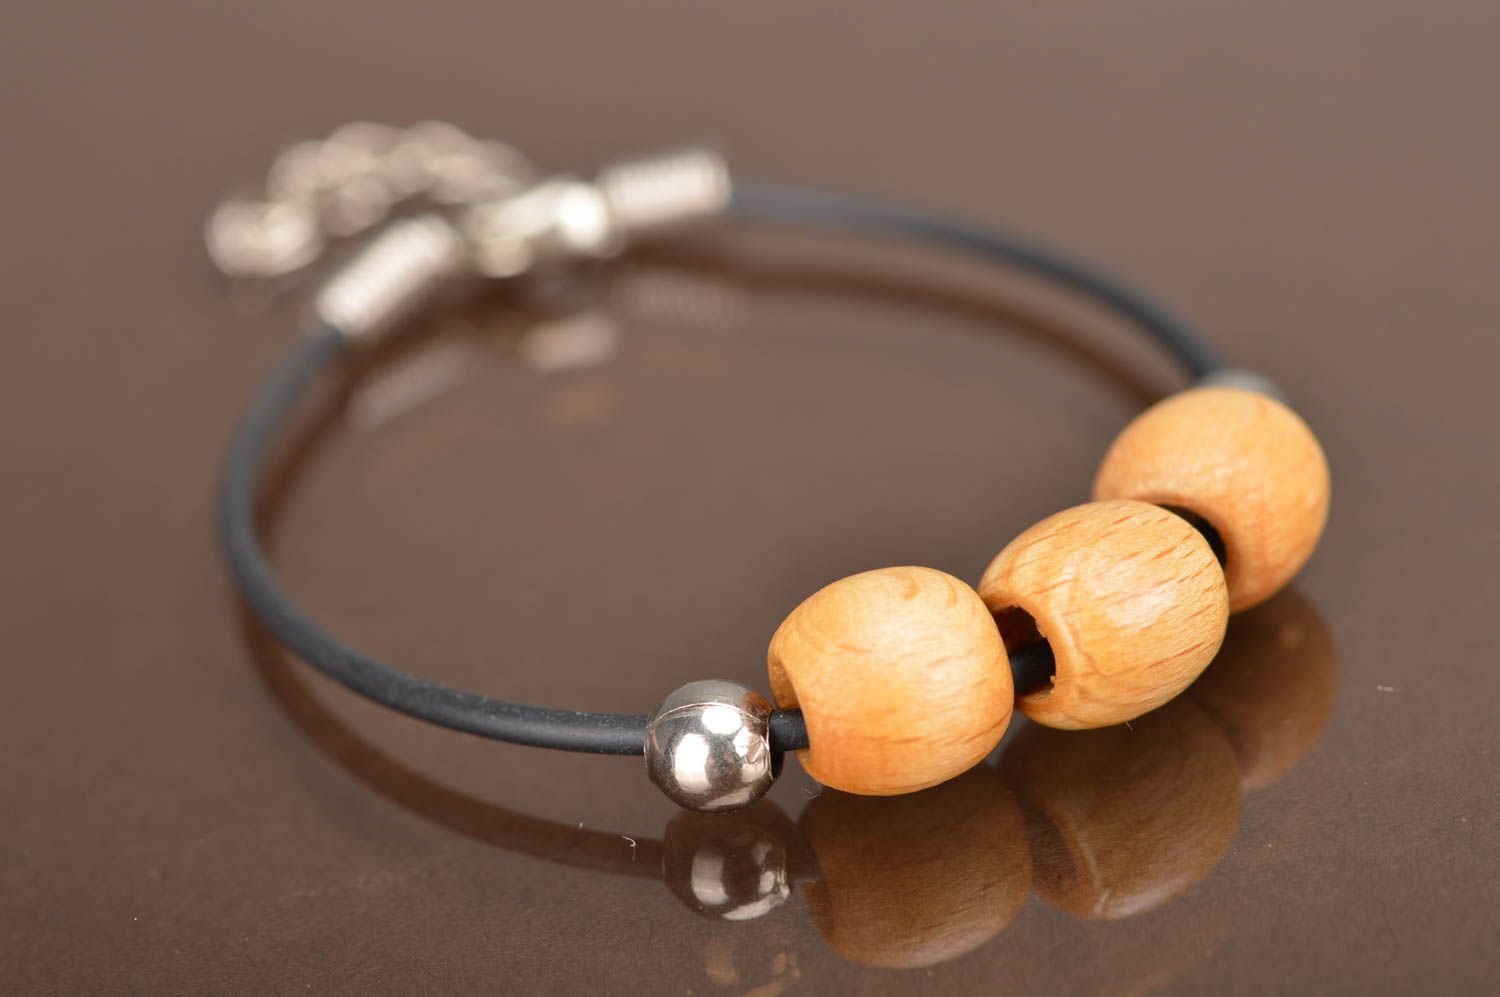 Handmade laconic simple rubber cord wrist bracelet with light wooden beads photo 2